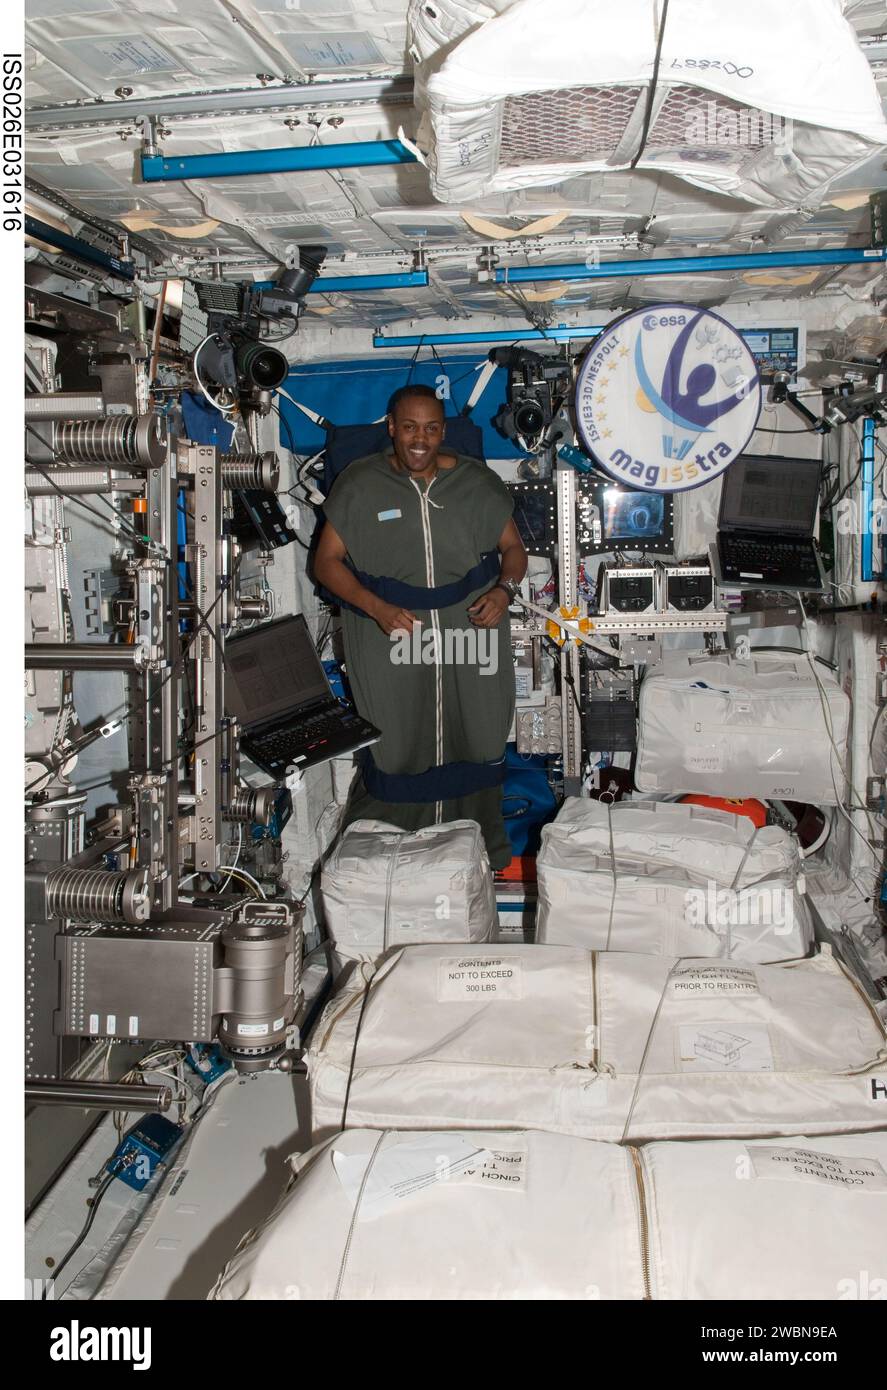 ISS026-E-031616 (3 March 2011) --- NASA astronaut Alvin Drew, STS-133 mission specialist, is pictured in his sleeping bag, which is attached in the Columbus laboratory of the International Space Station while space shuttle Discovery remains docked with the station. Stock Photo